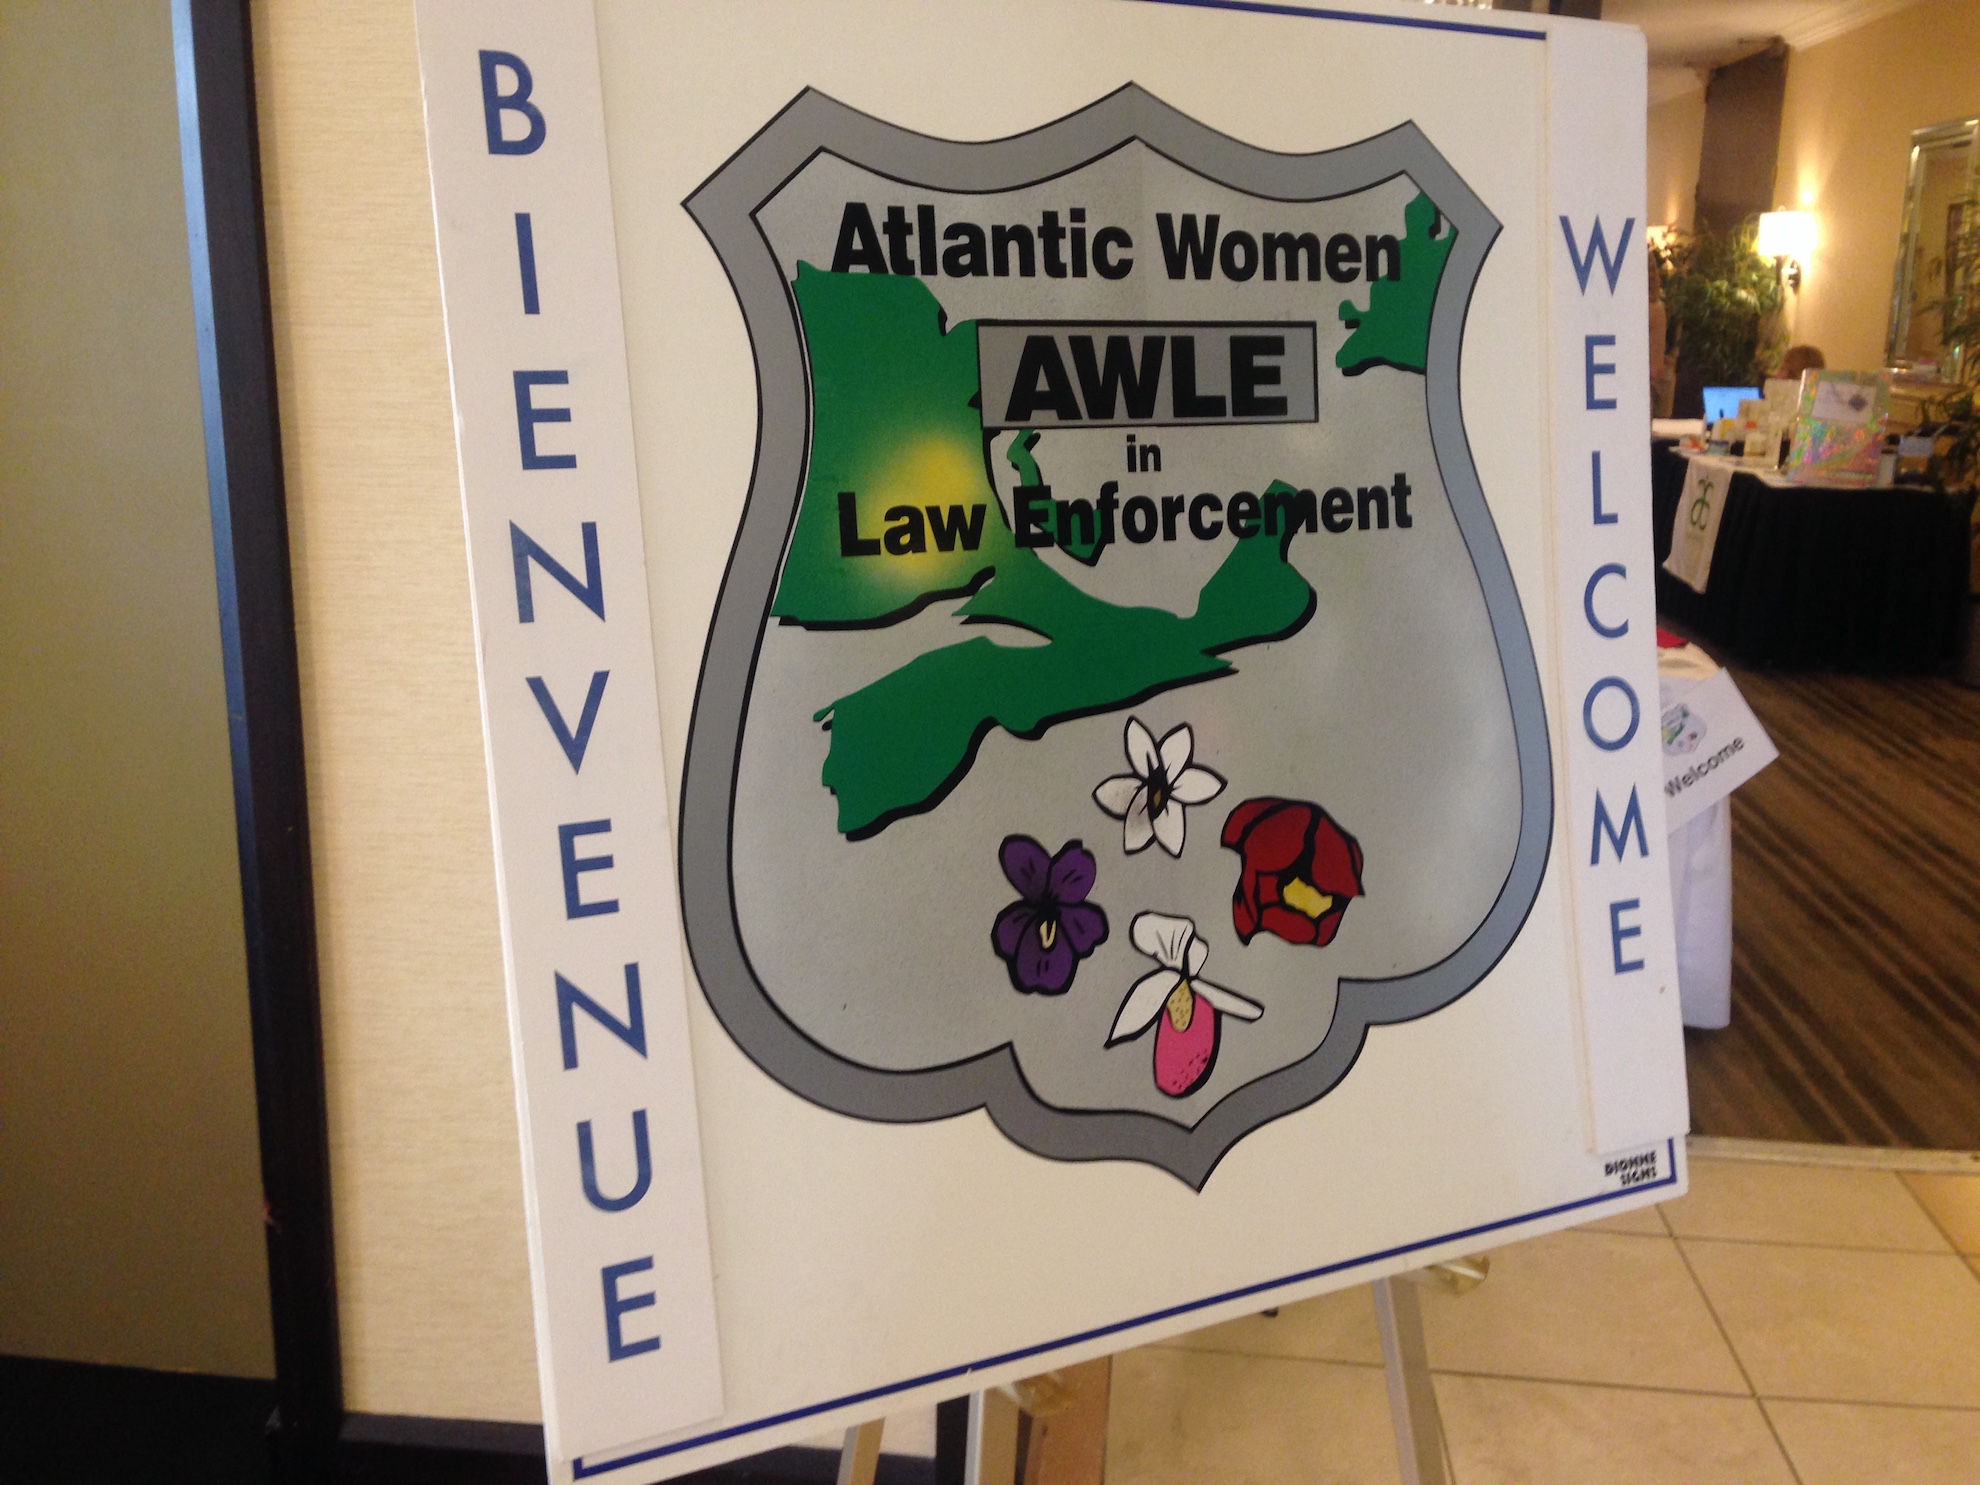 This year's Atlantic Women in Law Enforcement conference drew the largest crowds the organization has seen. 